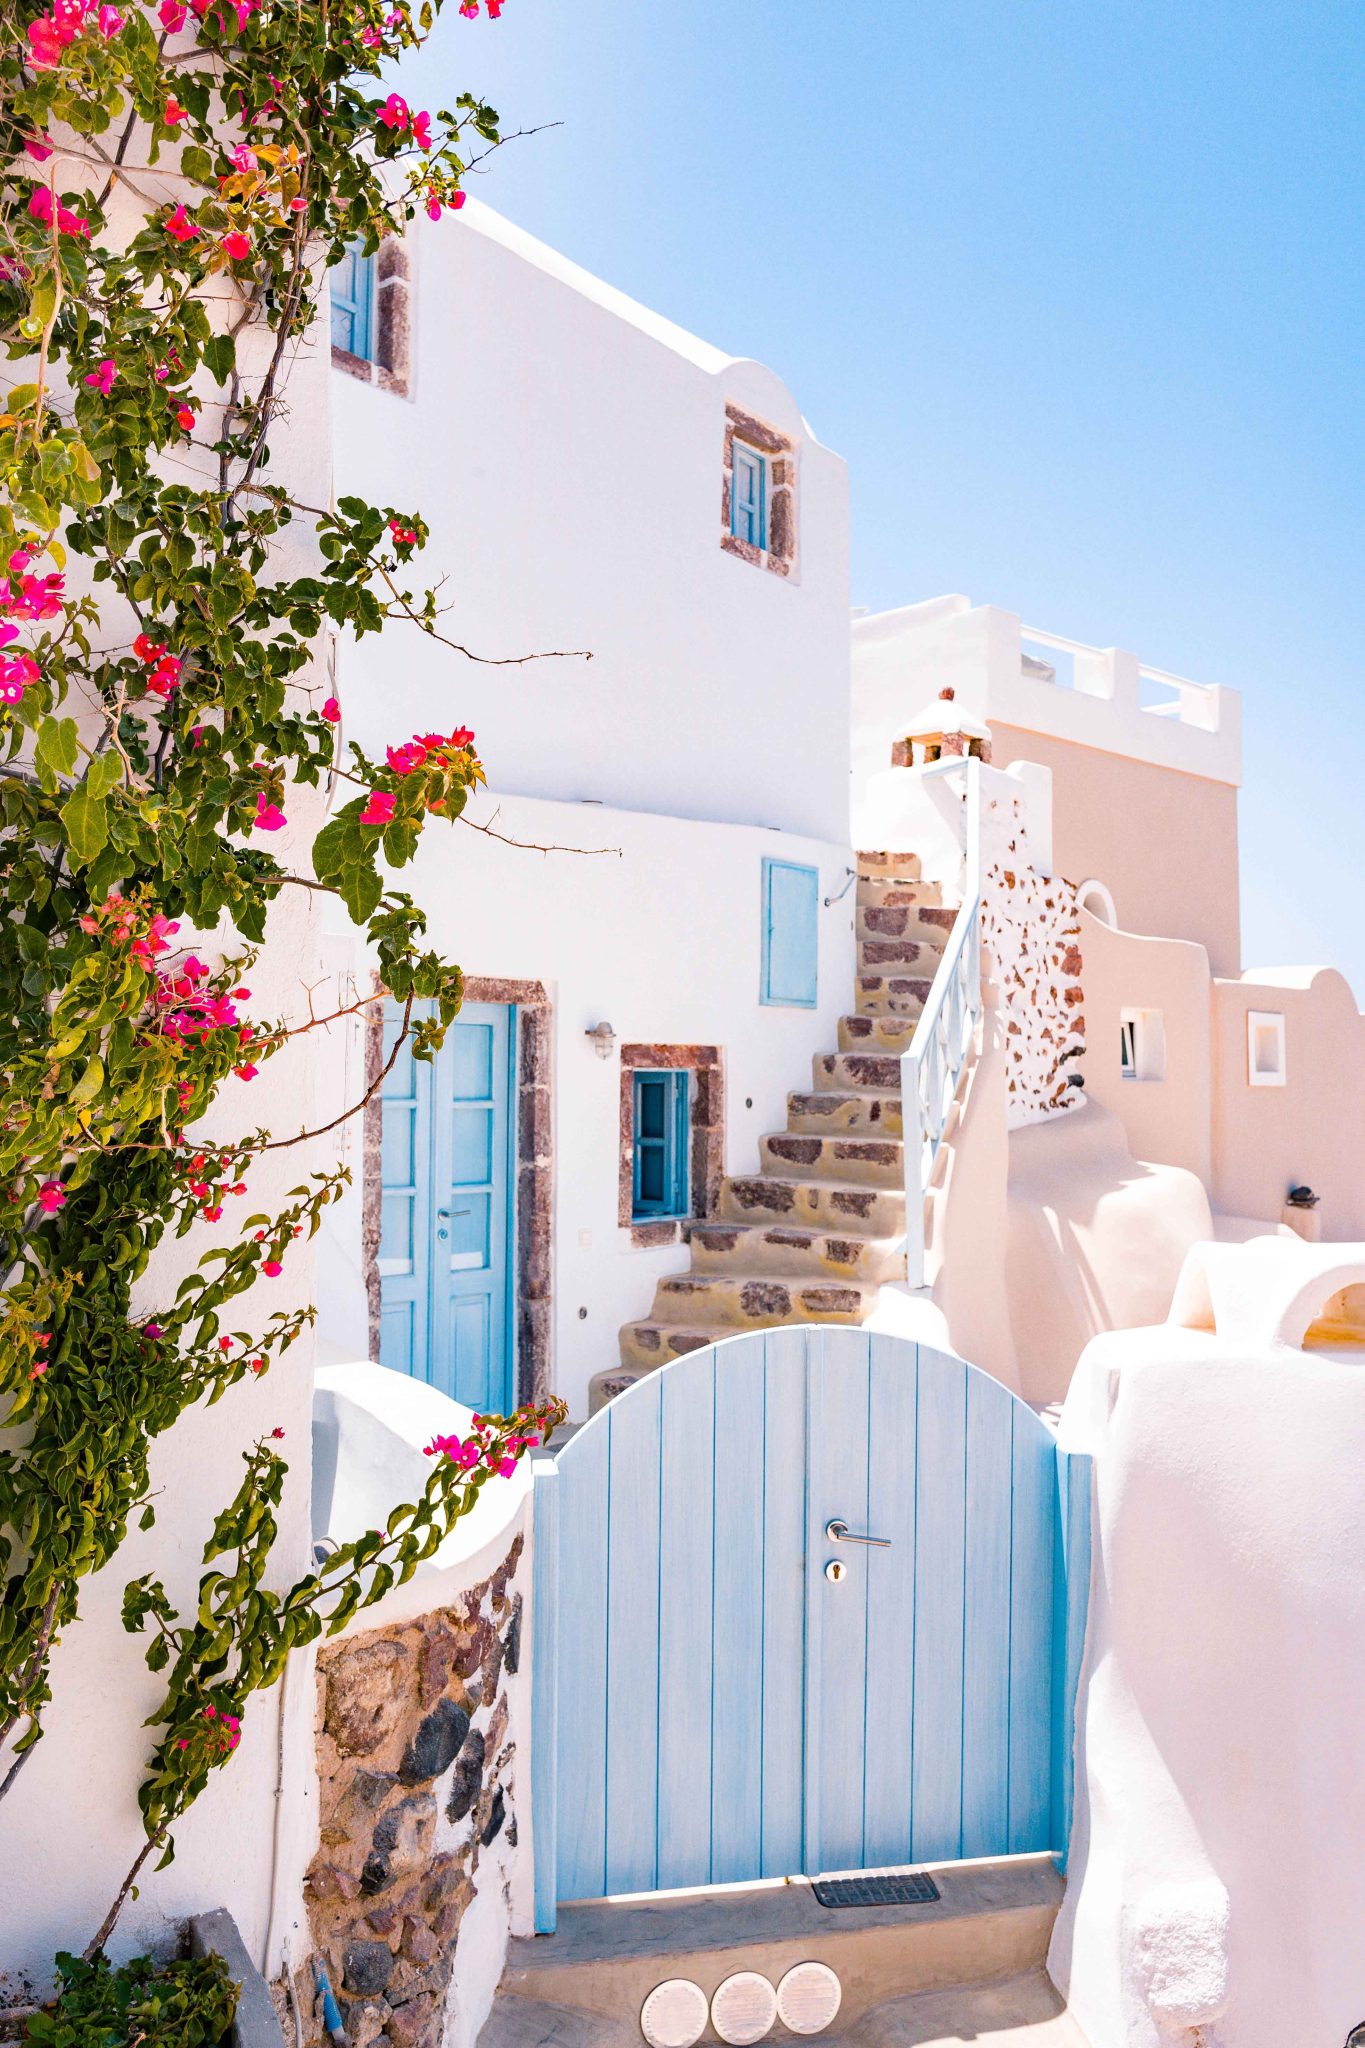 A charming photo of a village in Greece